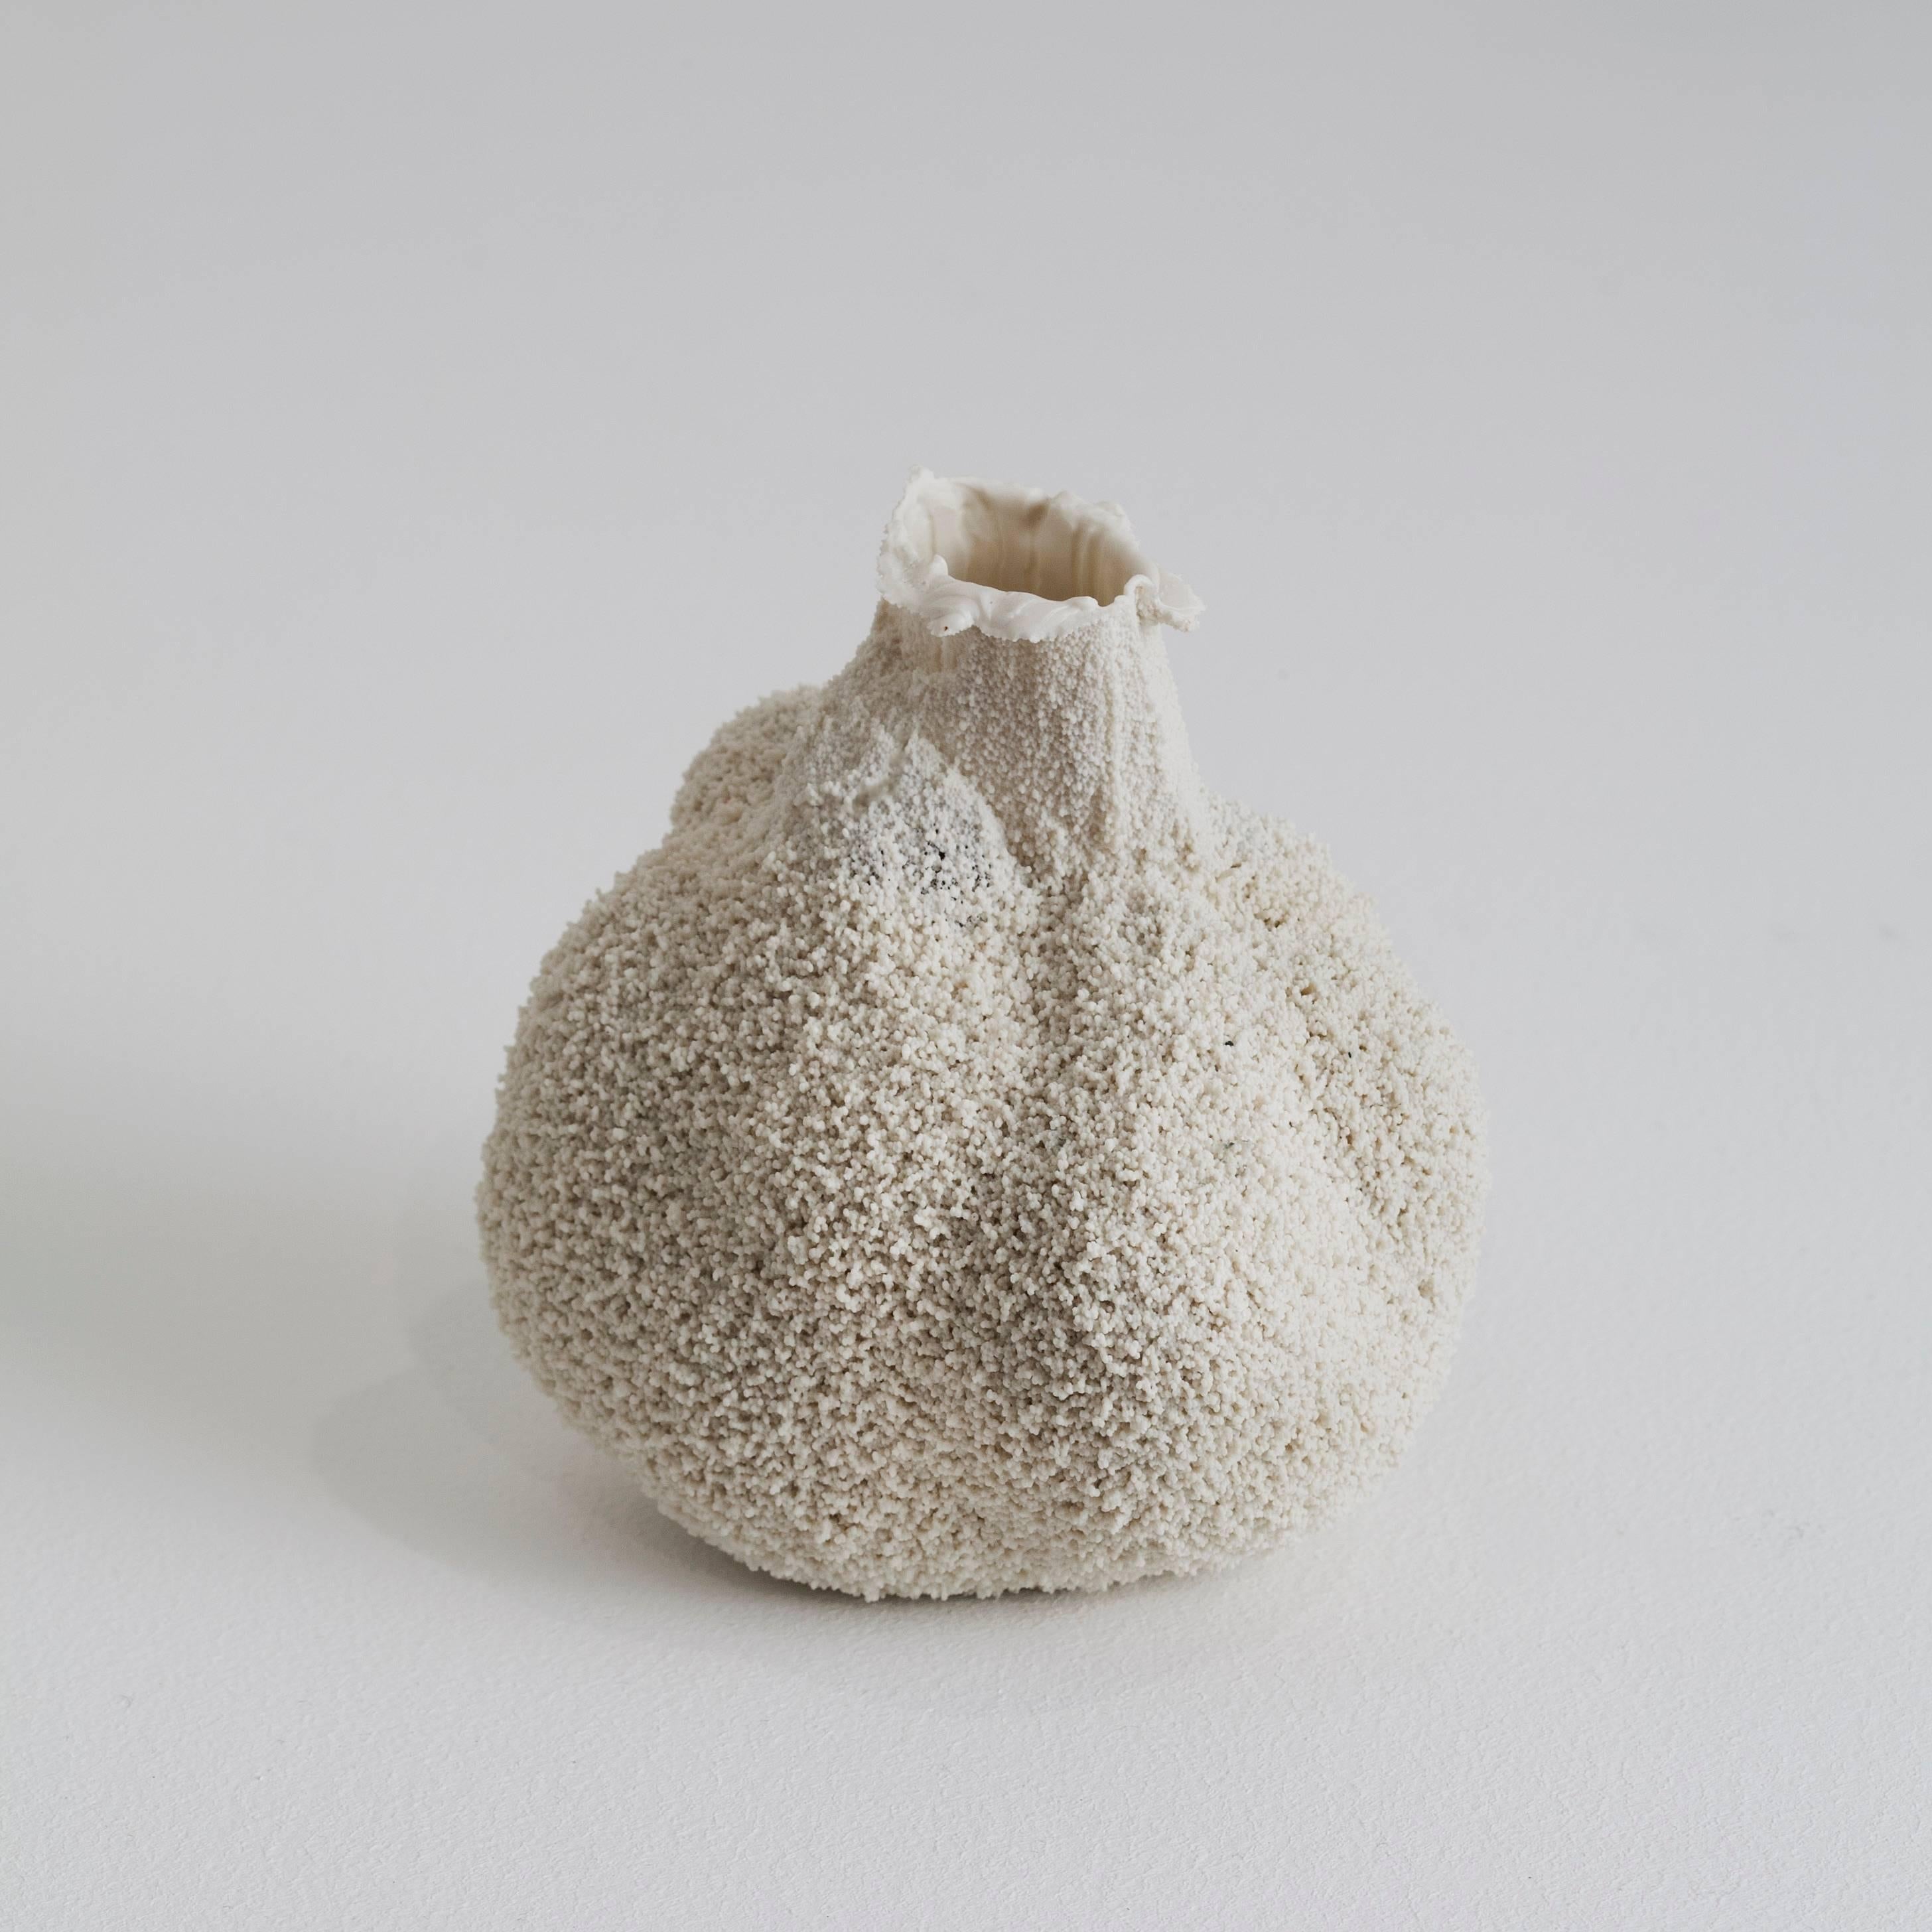 This is a small white ceramic vase by London-based Israeli artist Michal Fargo. She pours liquid porcelain into a hollowed block of foam, allowing it to settle into the pores. The vessel's final shape is determined by the material rather than the